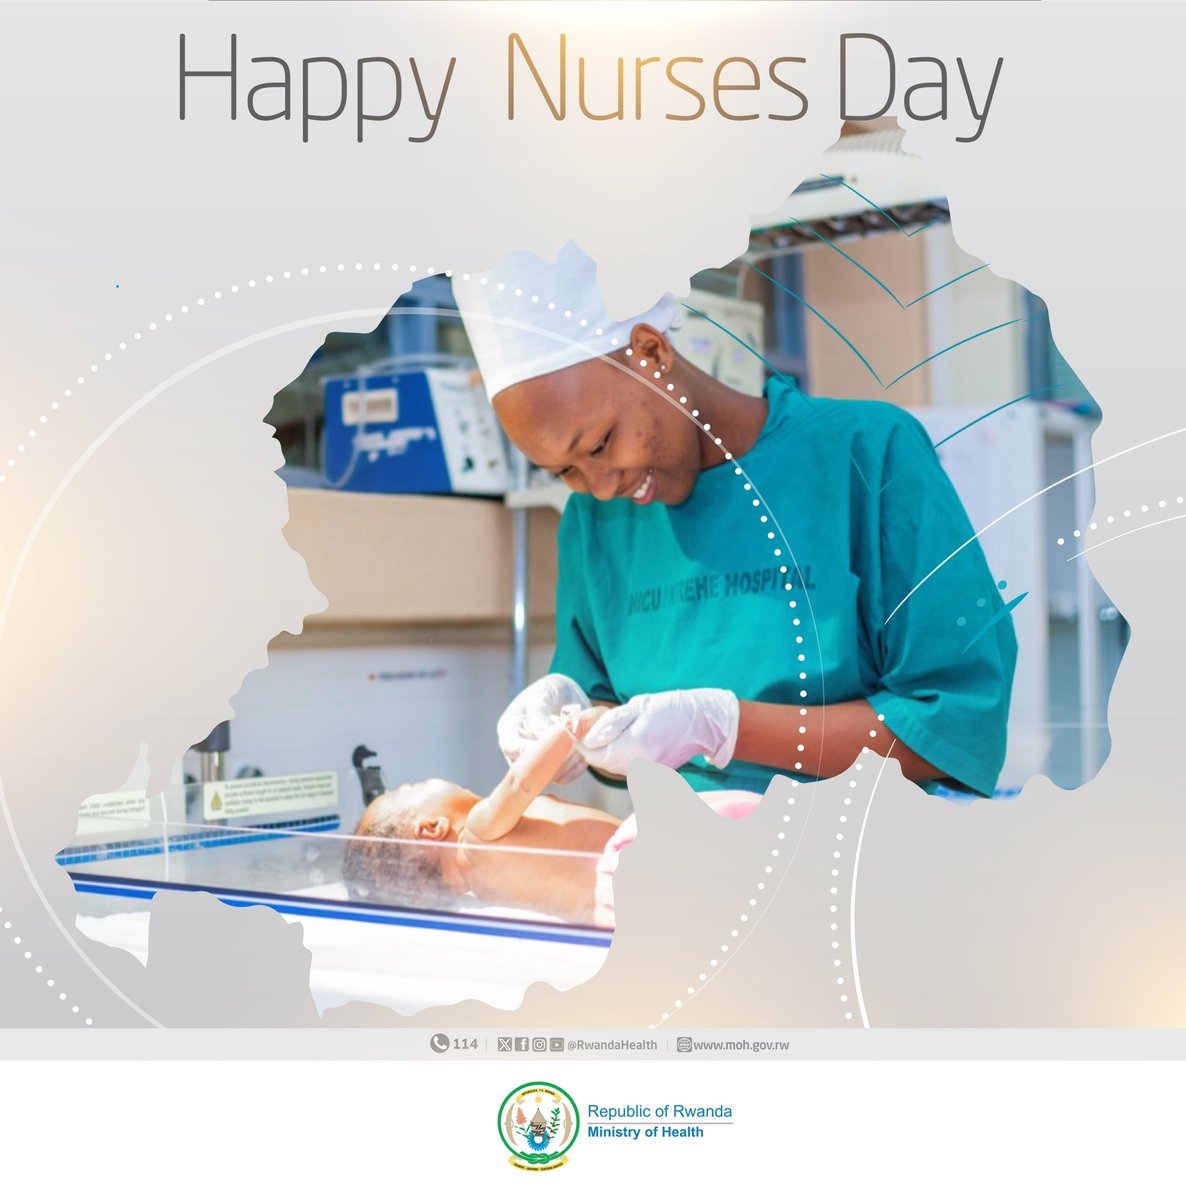 Nurses and Midwives represent the vast majority of Rwanda's health workforce. We recognise and appreciate their contribution to improving health services in Rwanda. Happy #InternationalNursesDay